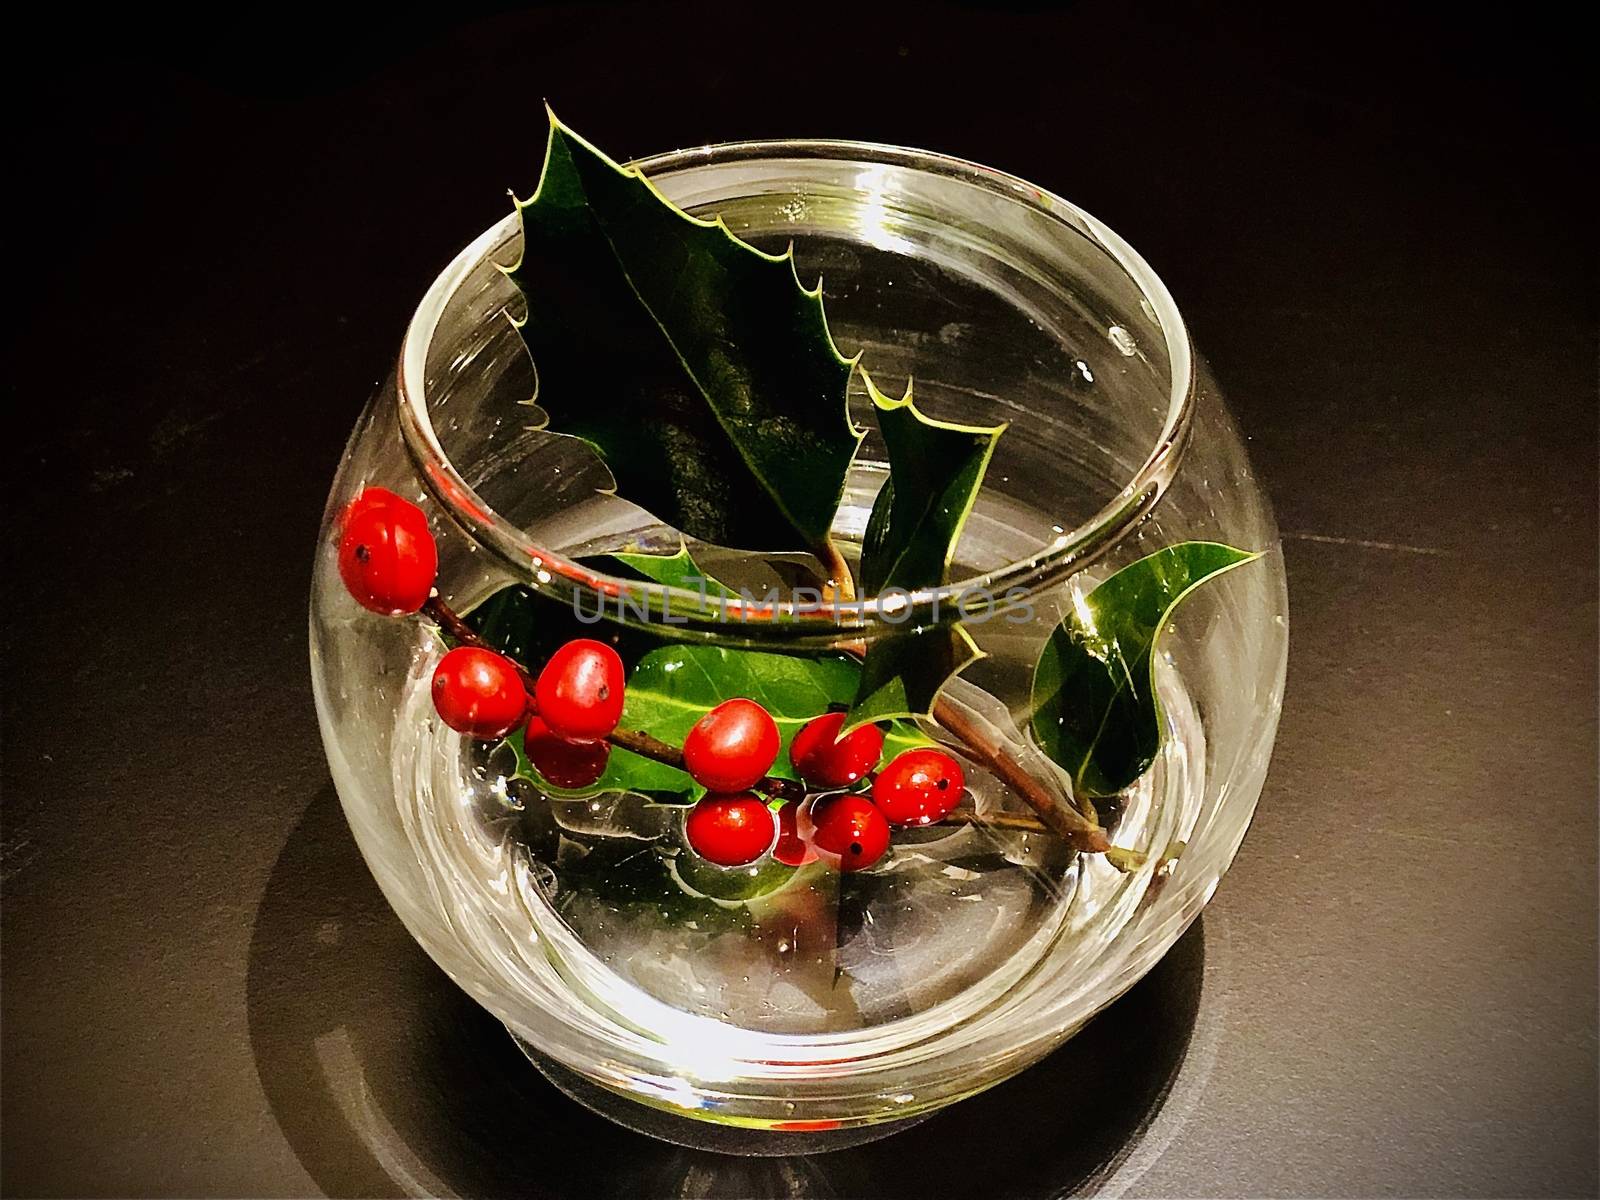 Mistletoe in a glass isolated on black by F1b0nacci